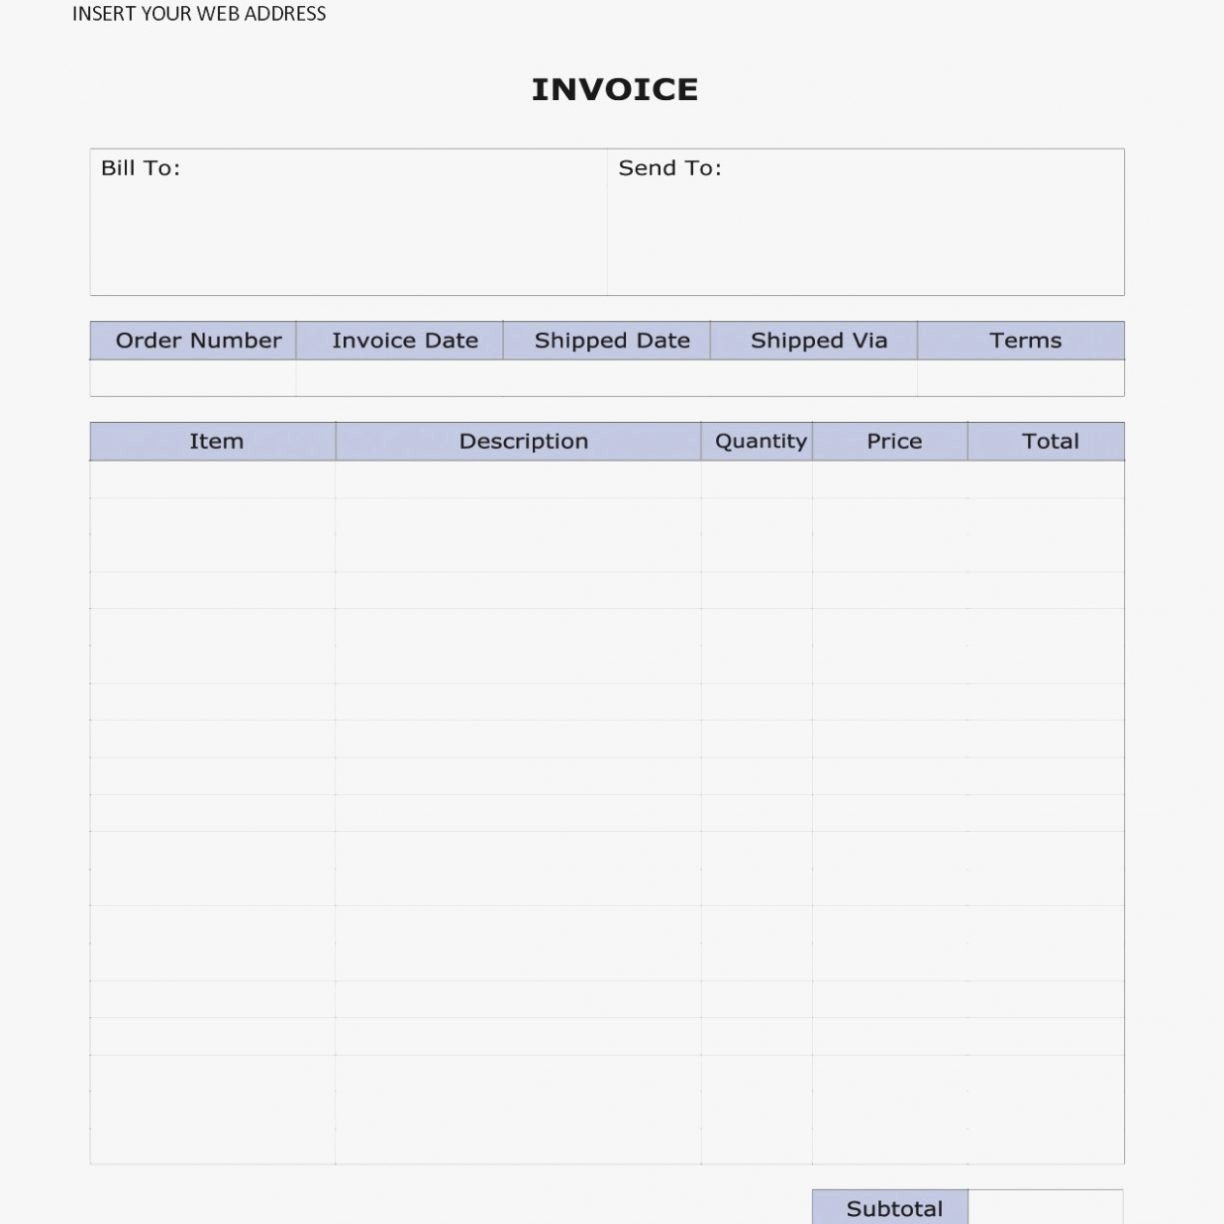 Invoice Template for Mac Awesome Invoicetes for Macte Downloadterecords Resume Make